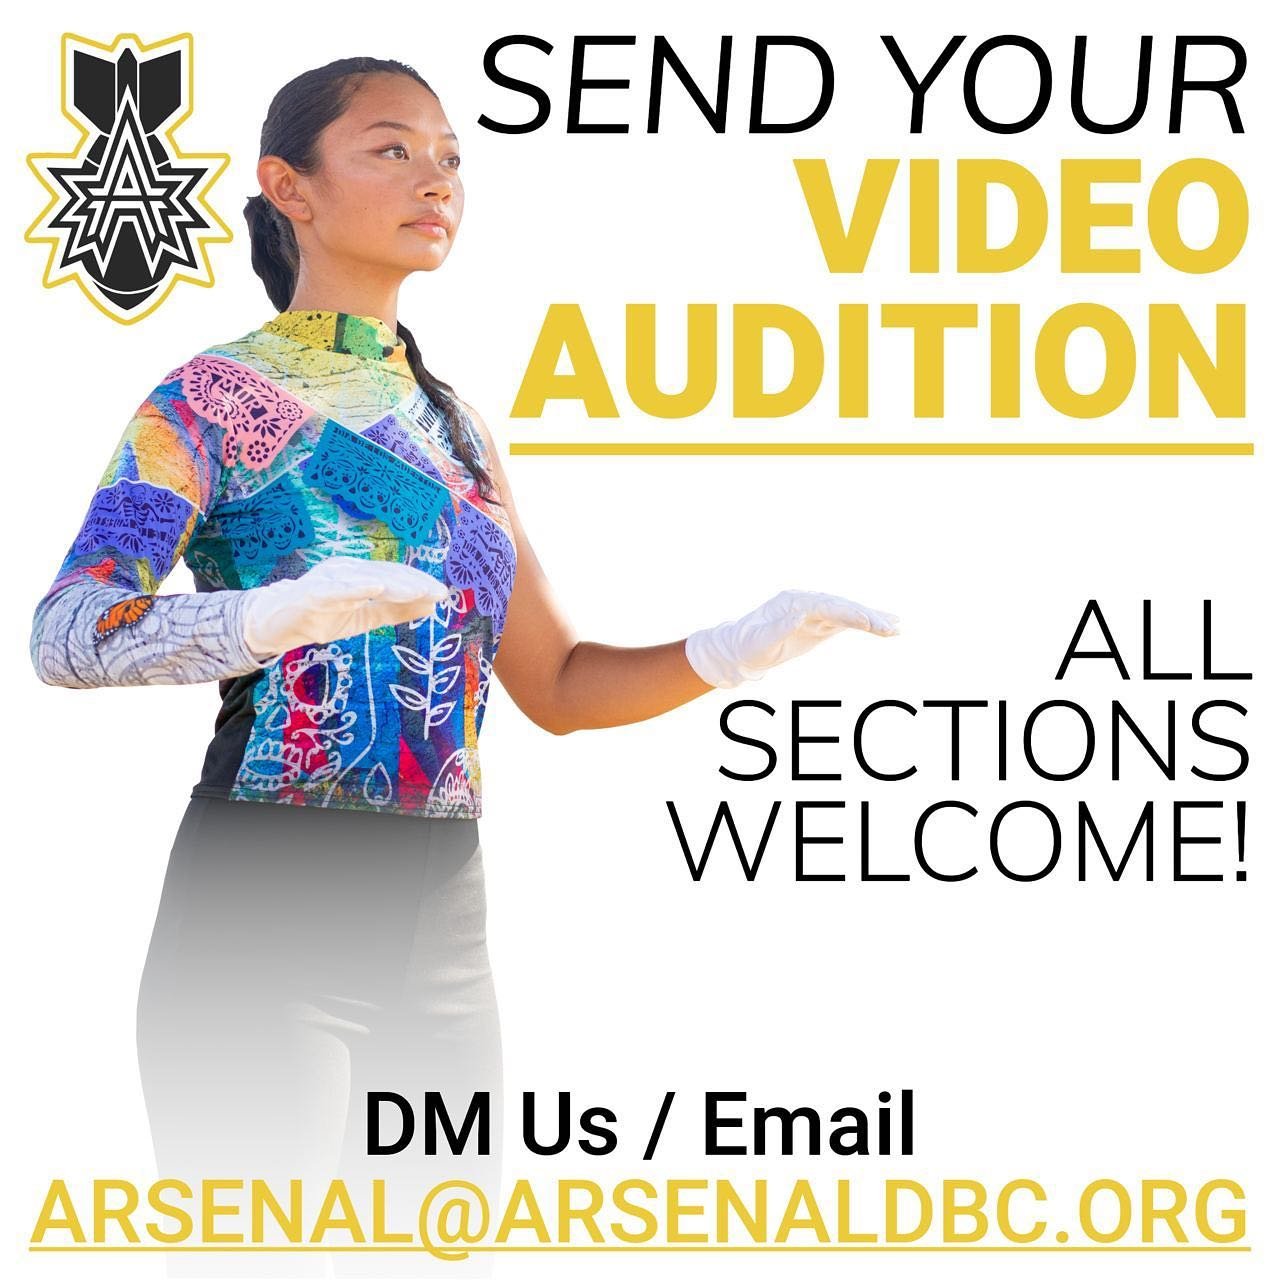 It&rsquo;s not too late to march this summer! DM or email us on how you can send in a video audition and be a part of #ARSENAL2024 ! Link in our bio for more info! 

#arsenaldbc #dci #dci2024 #drumcorps #marchingband #brass #colorguard #percussion #d